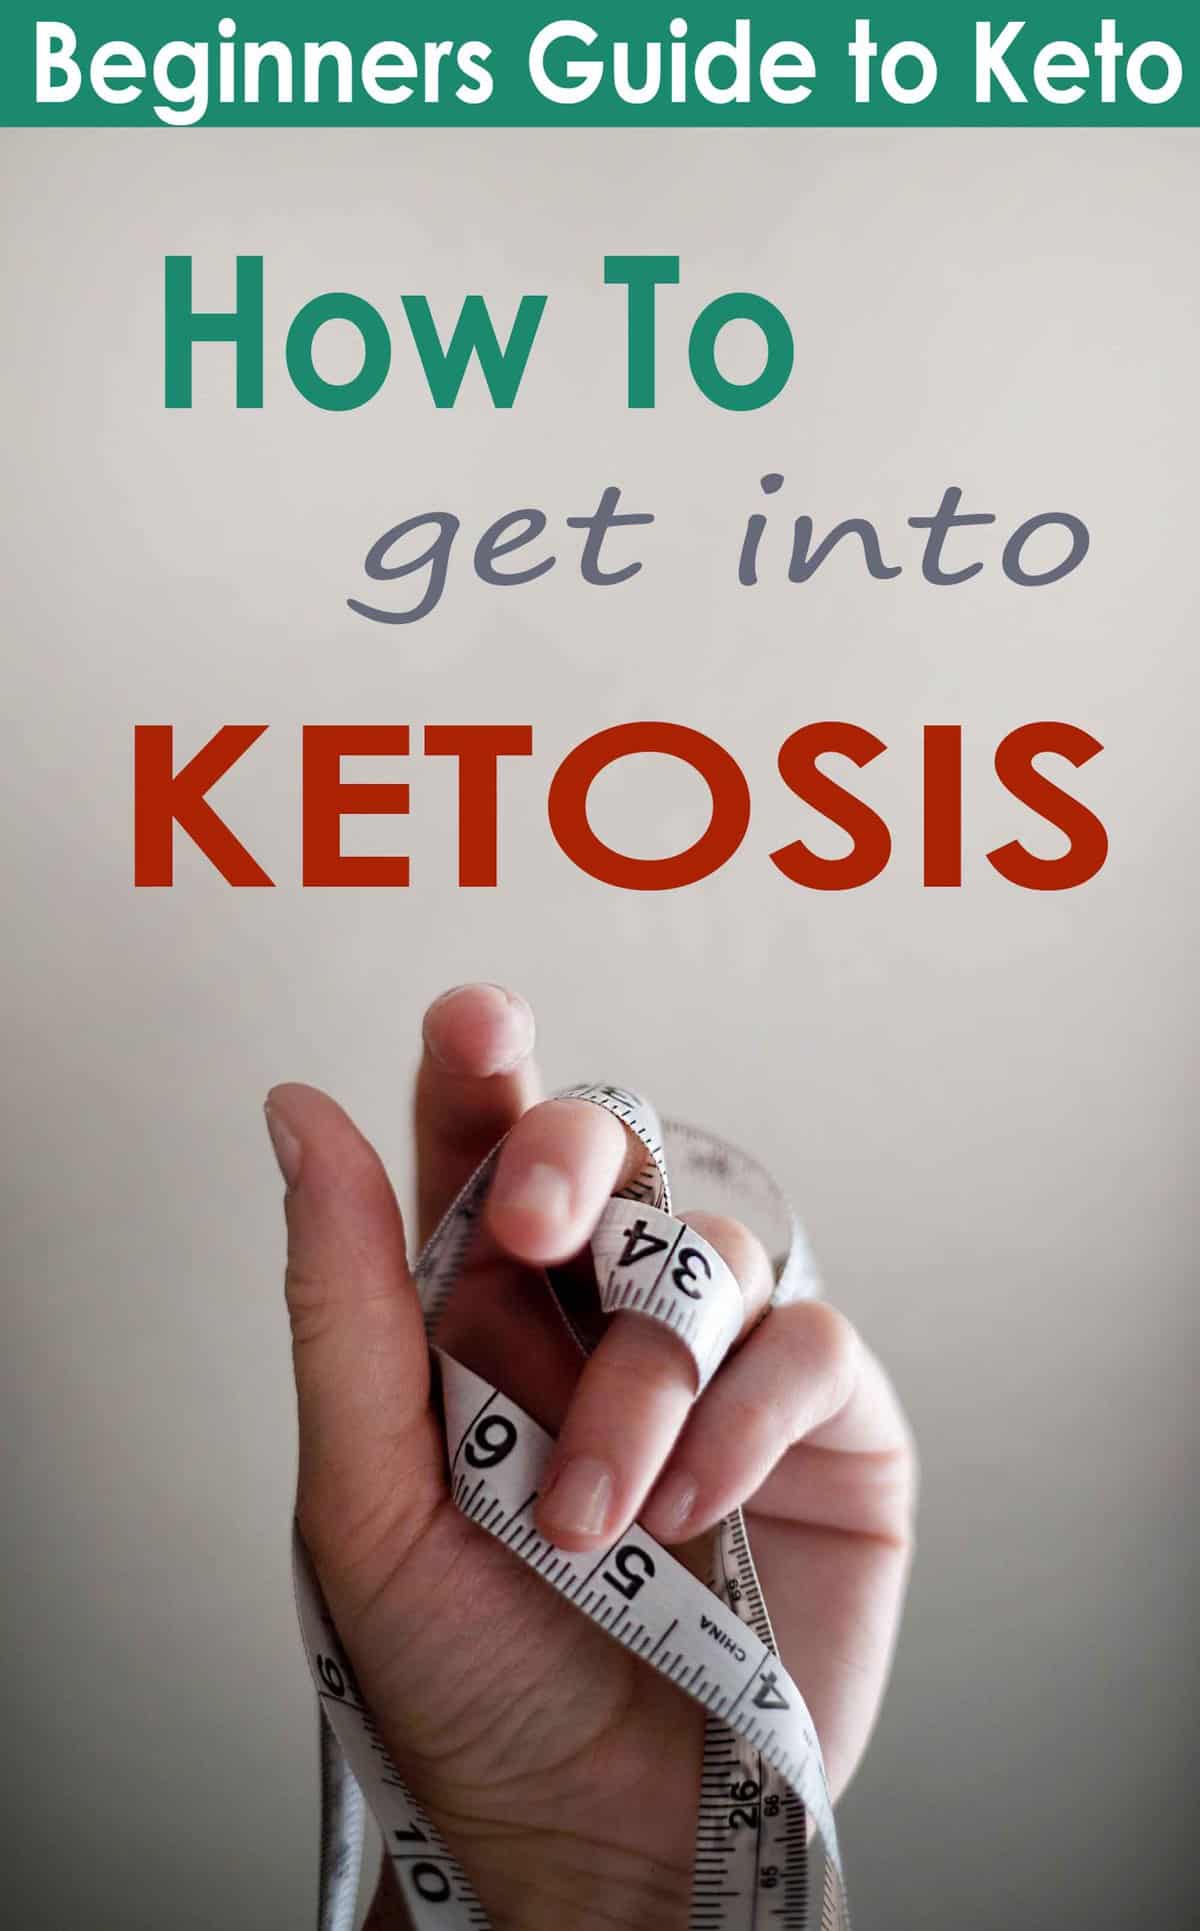 Ketosis: what it is, why its good for you and how to get into Ketosis. With links to additional information on the Ketogenic diet and allowed foods. 